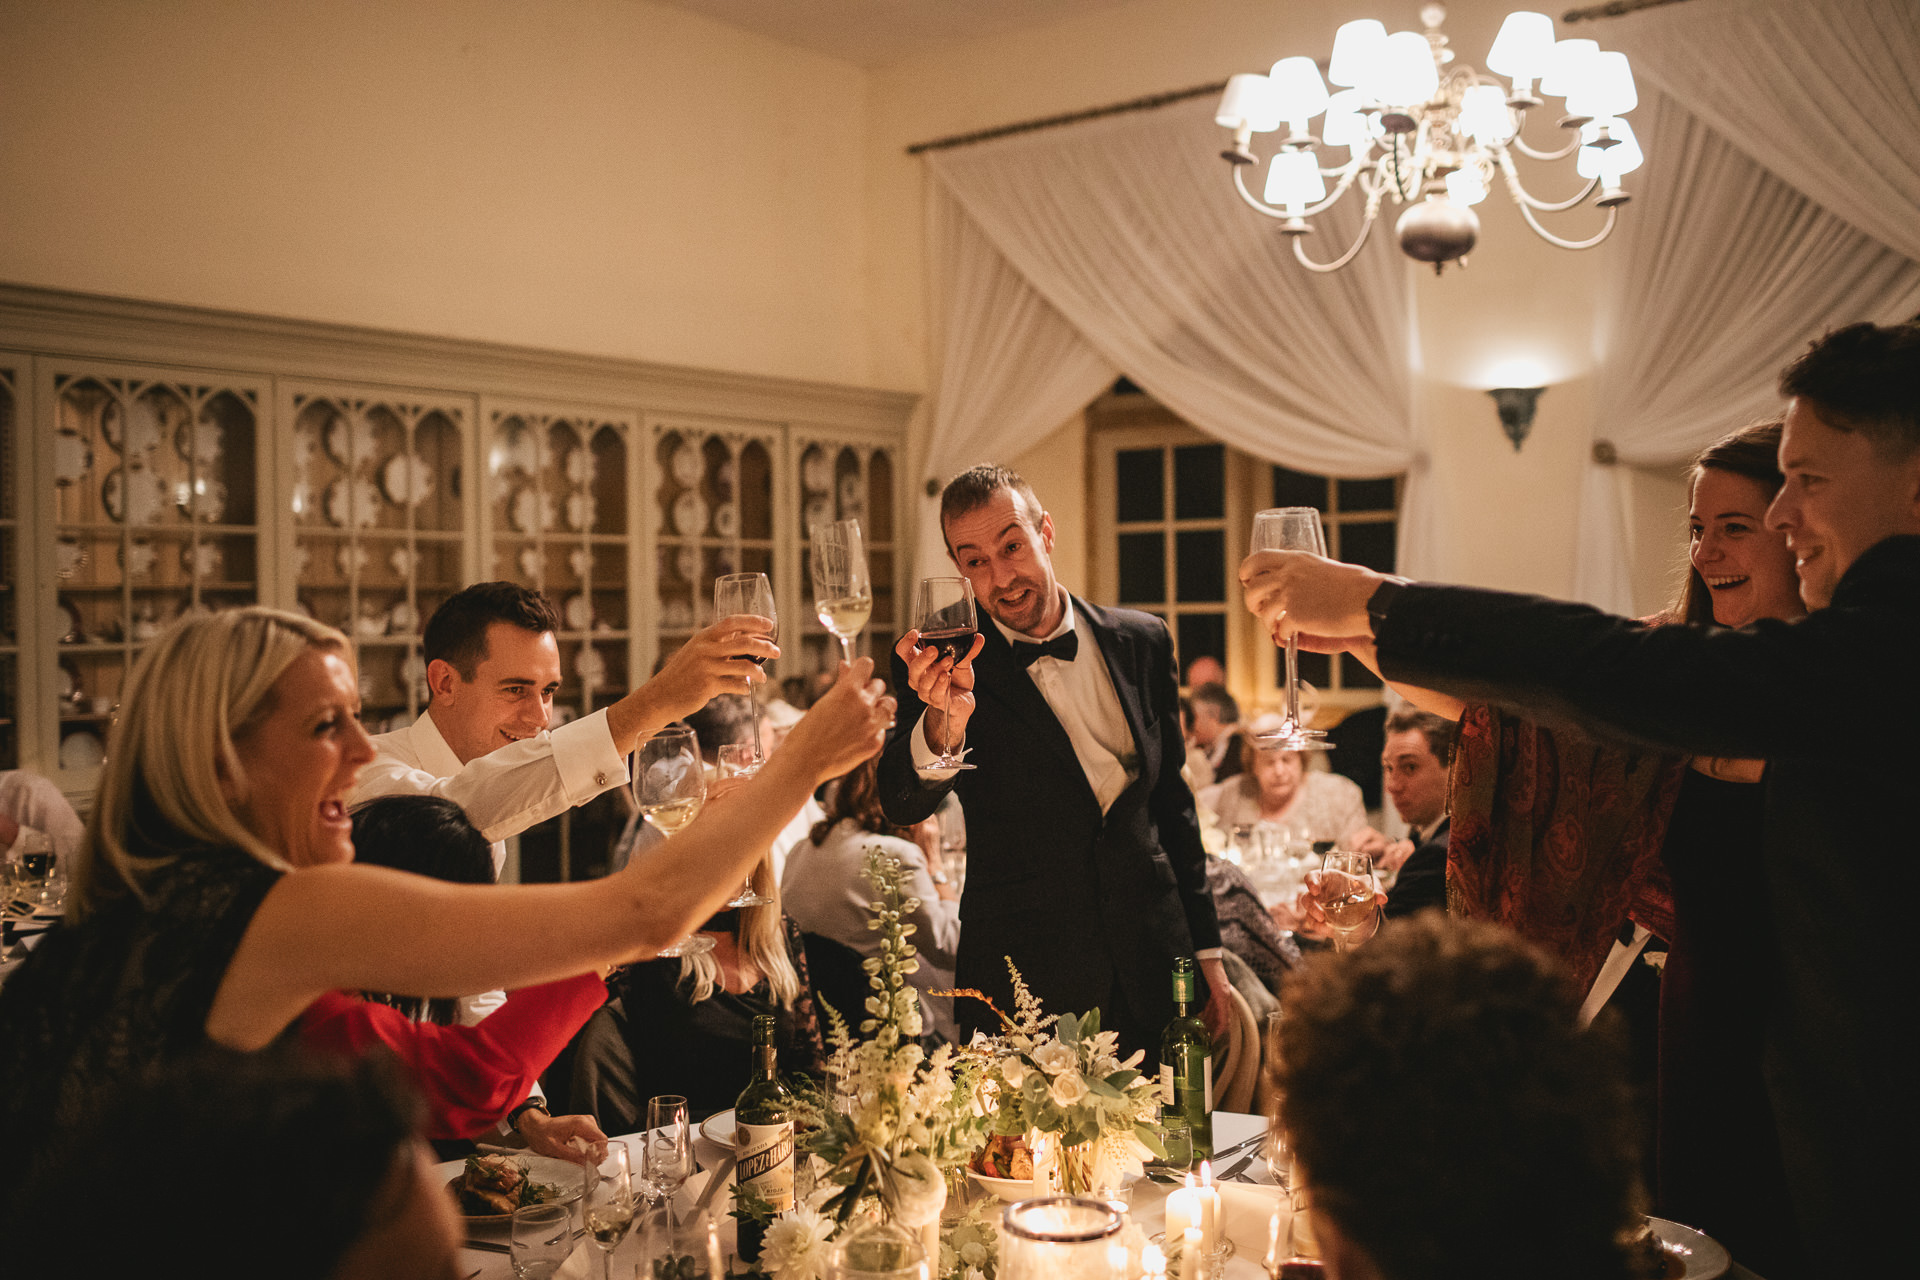 Wedding guests around a table toasting with glasses